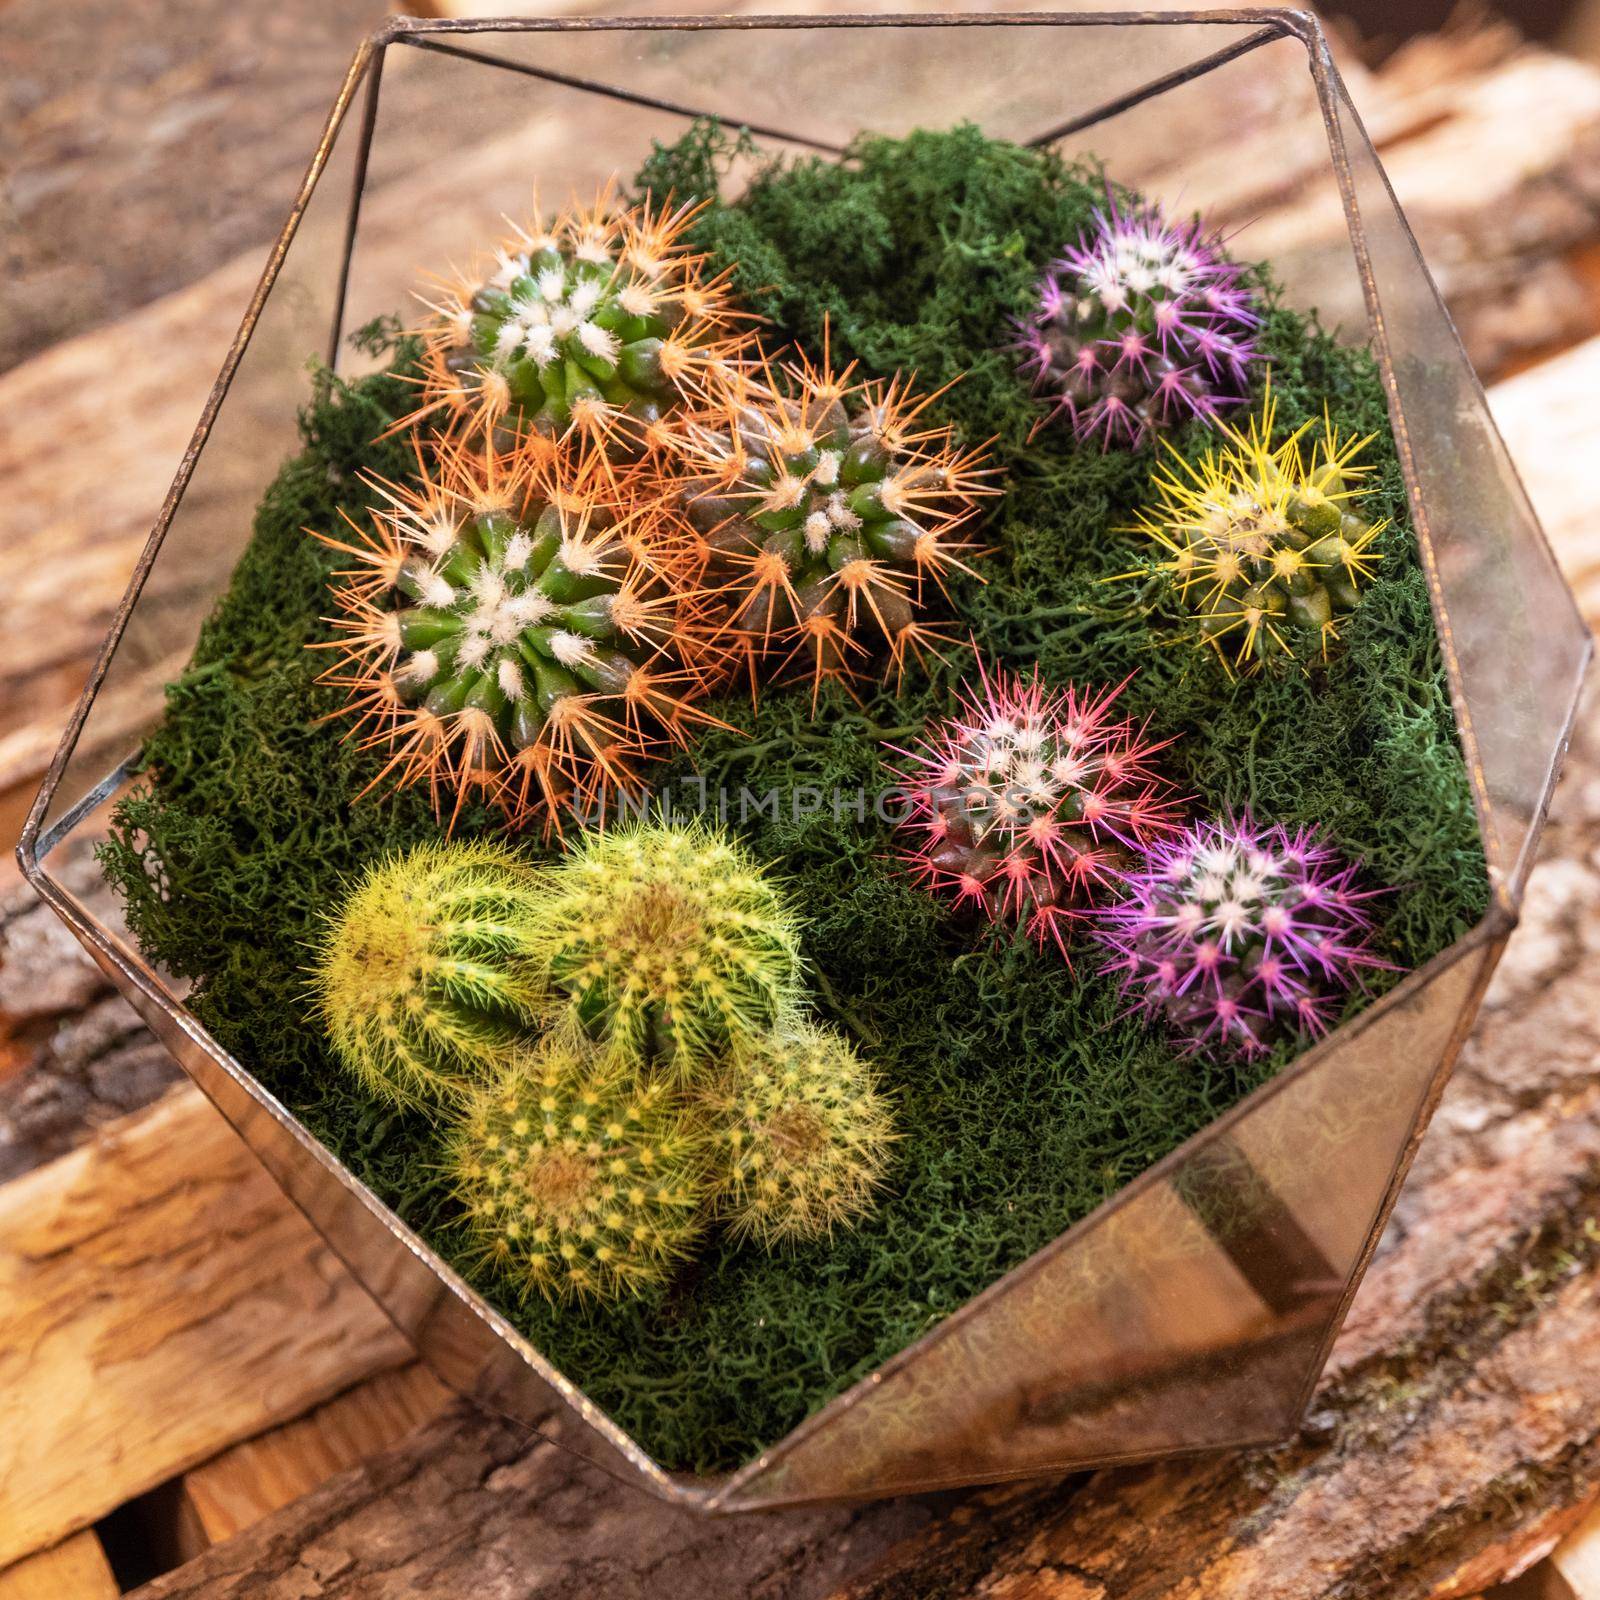 Terrarium plant with succulent, cactus in glass by ferhad